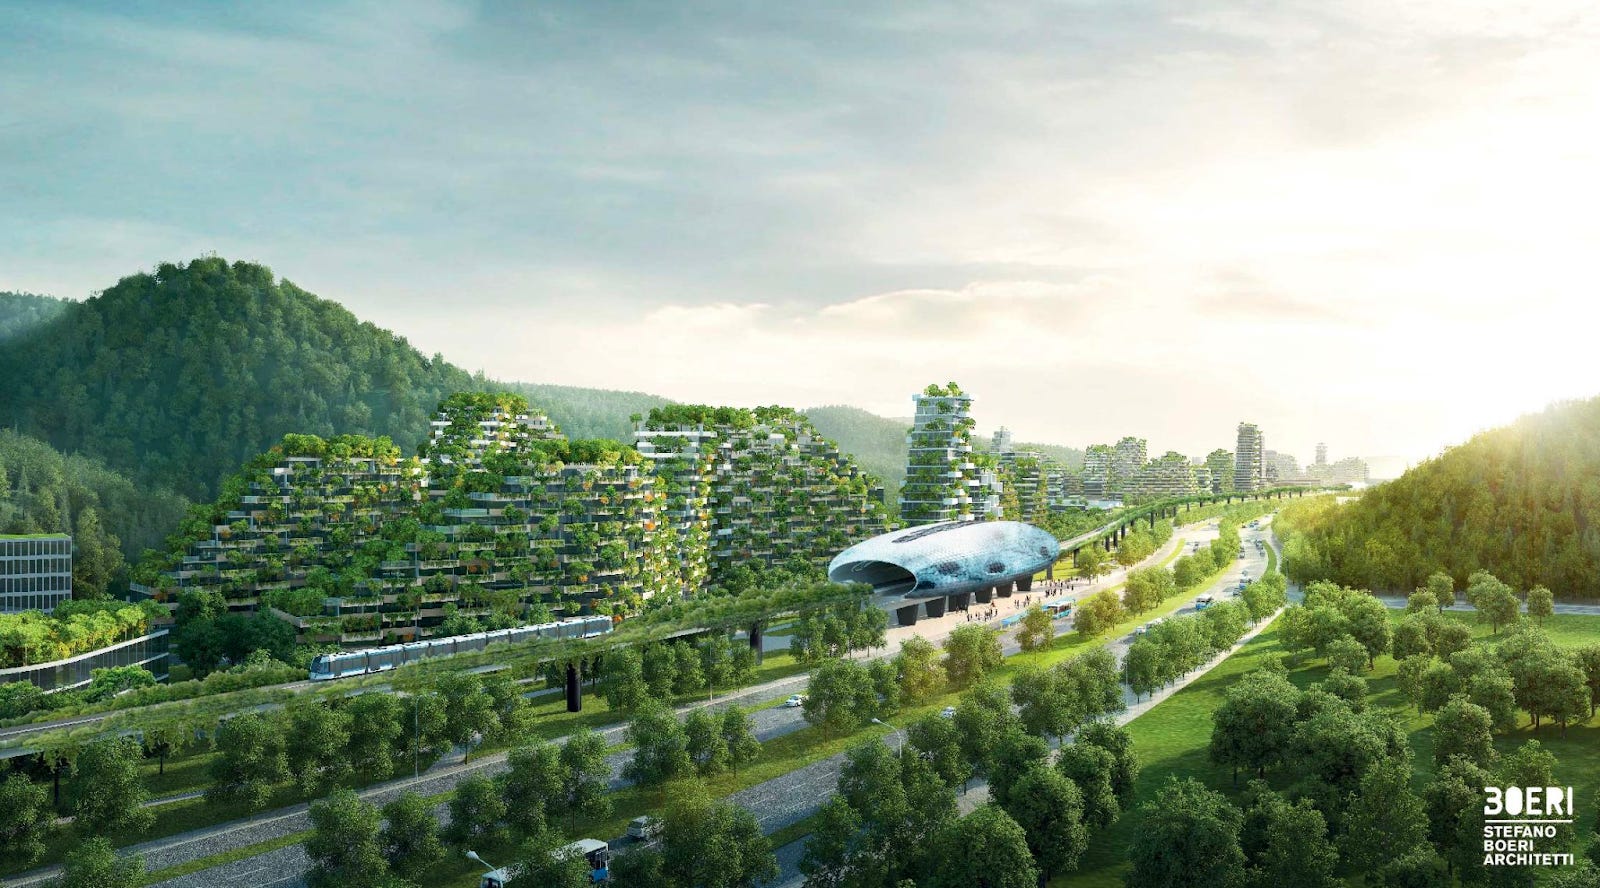 Solarpunk: Refuturing our Imagination for an Ecological Transformation